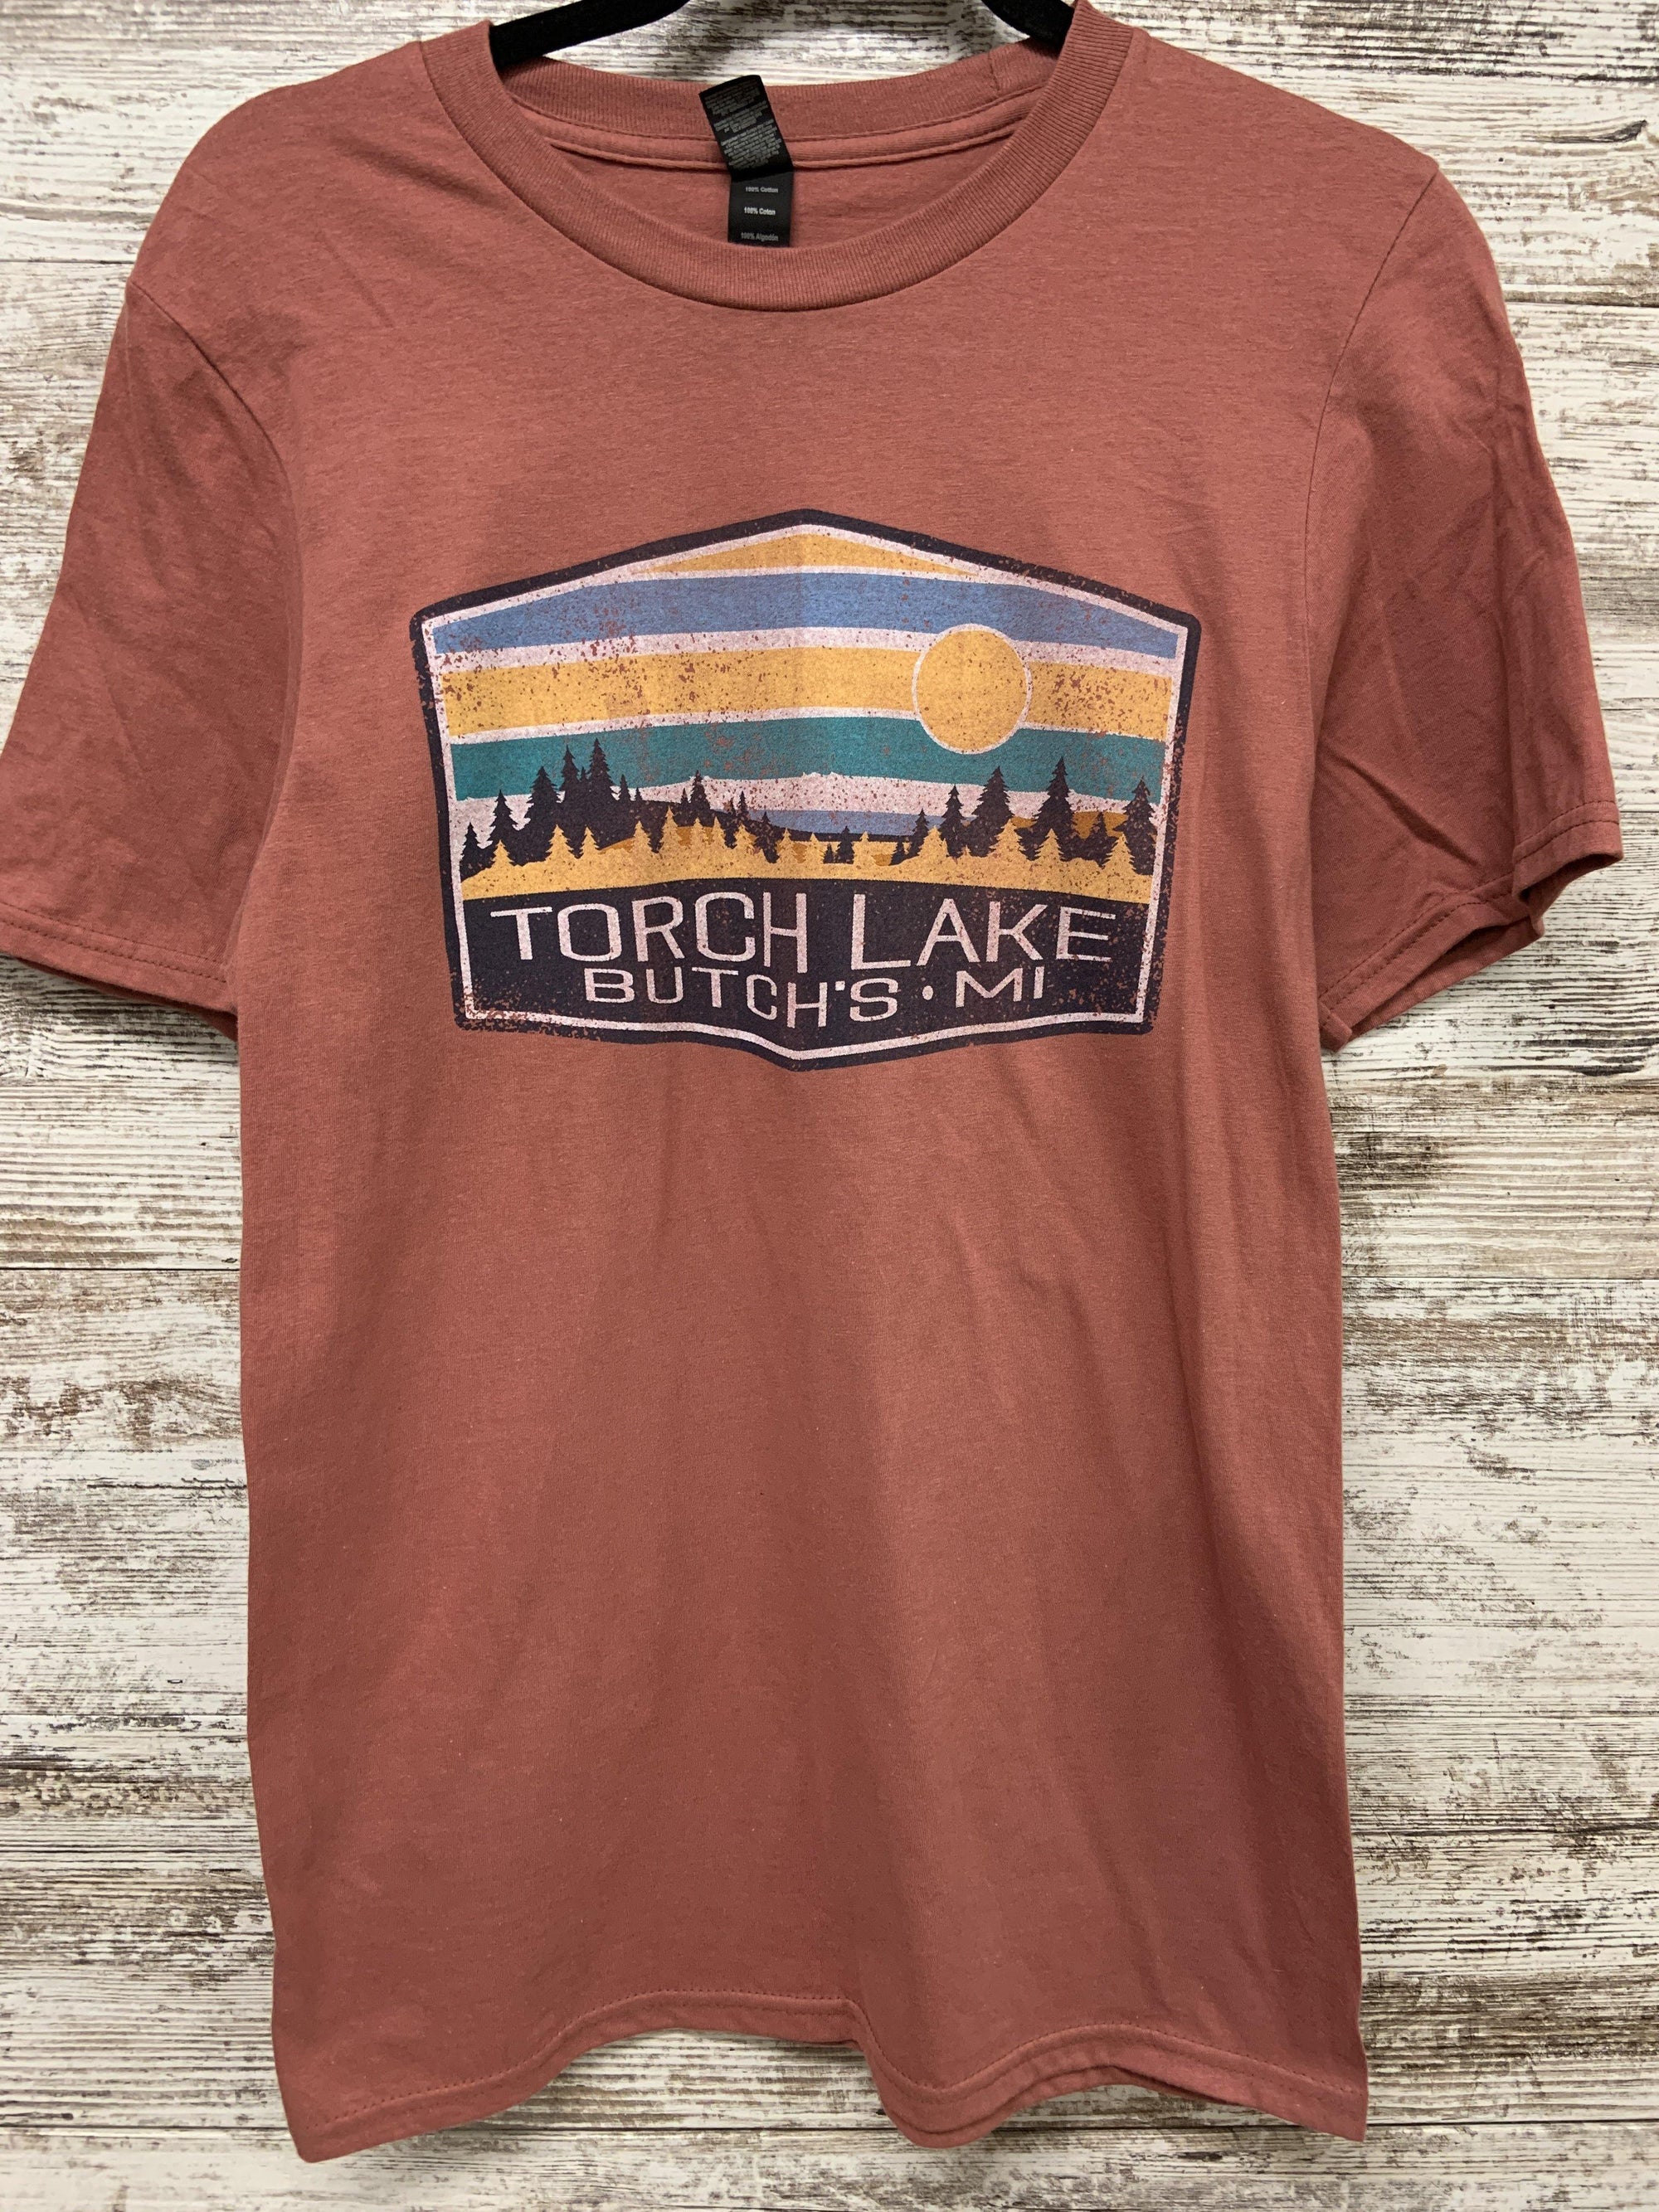 Sunrise over Torch Tshirt - Butch's Tackle & Marine - Pontoon Rentals on Torch Lake